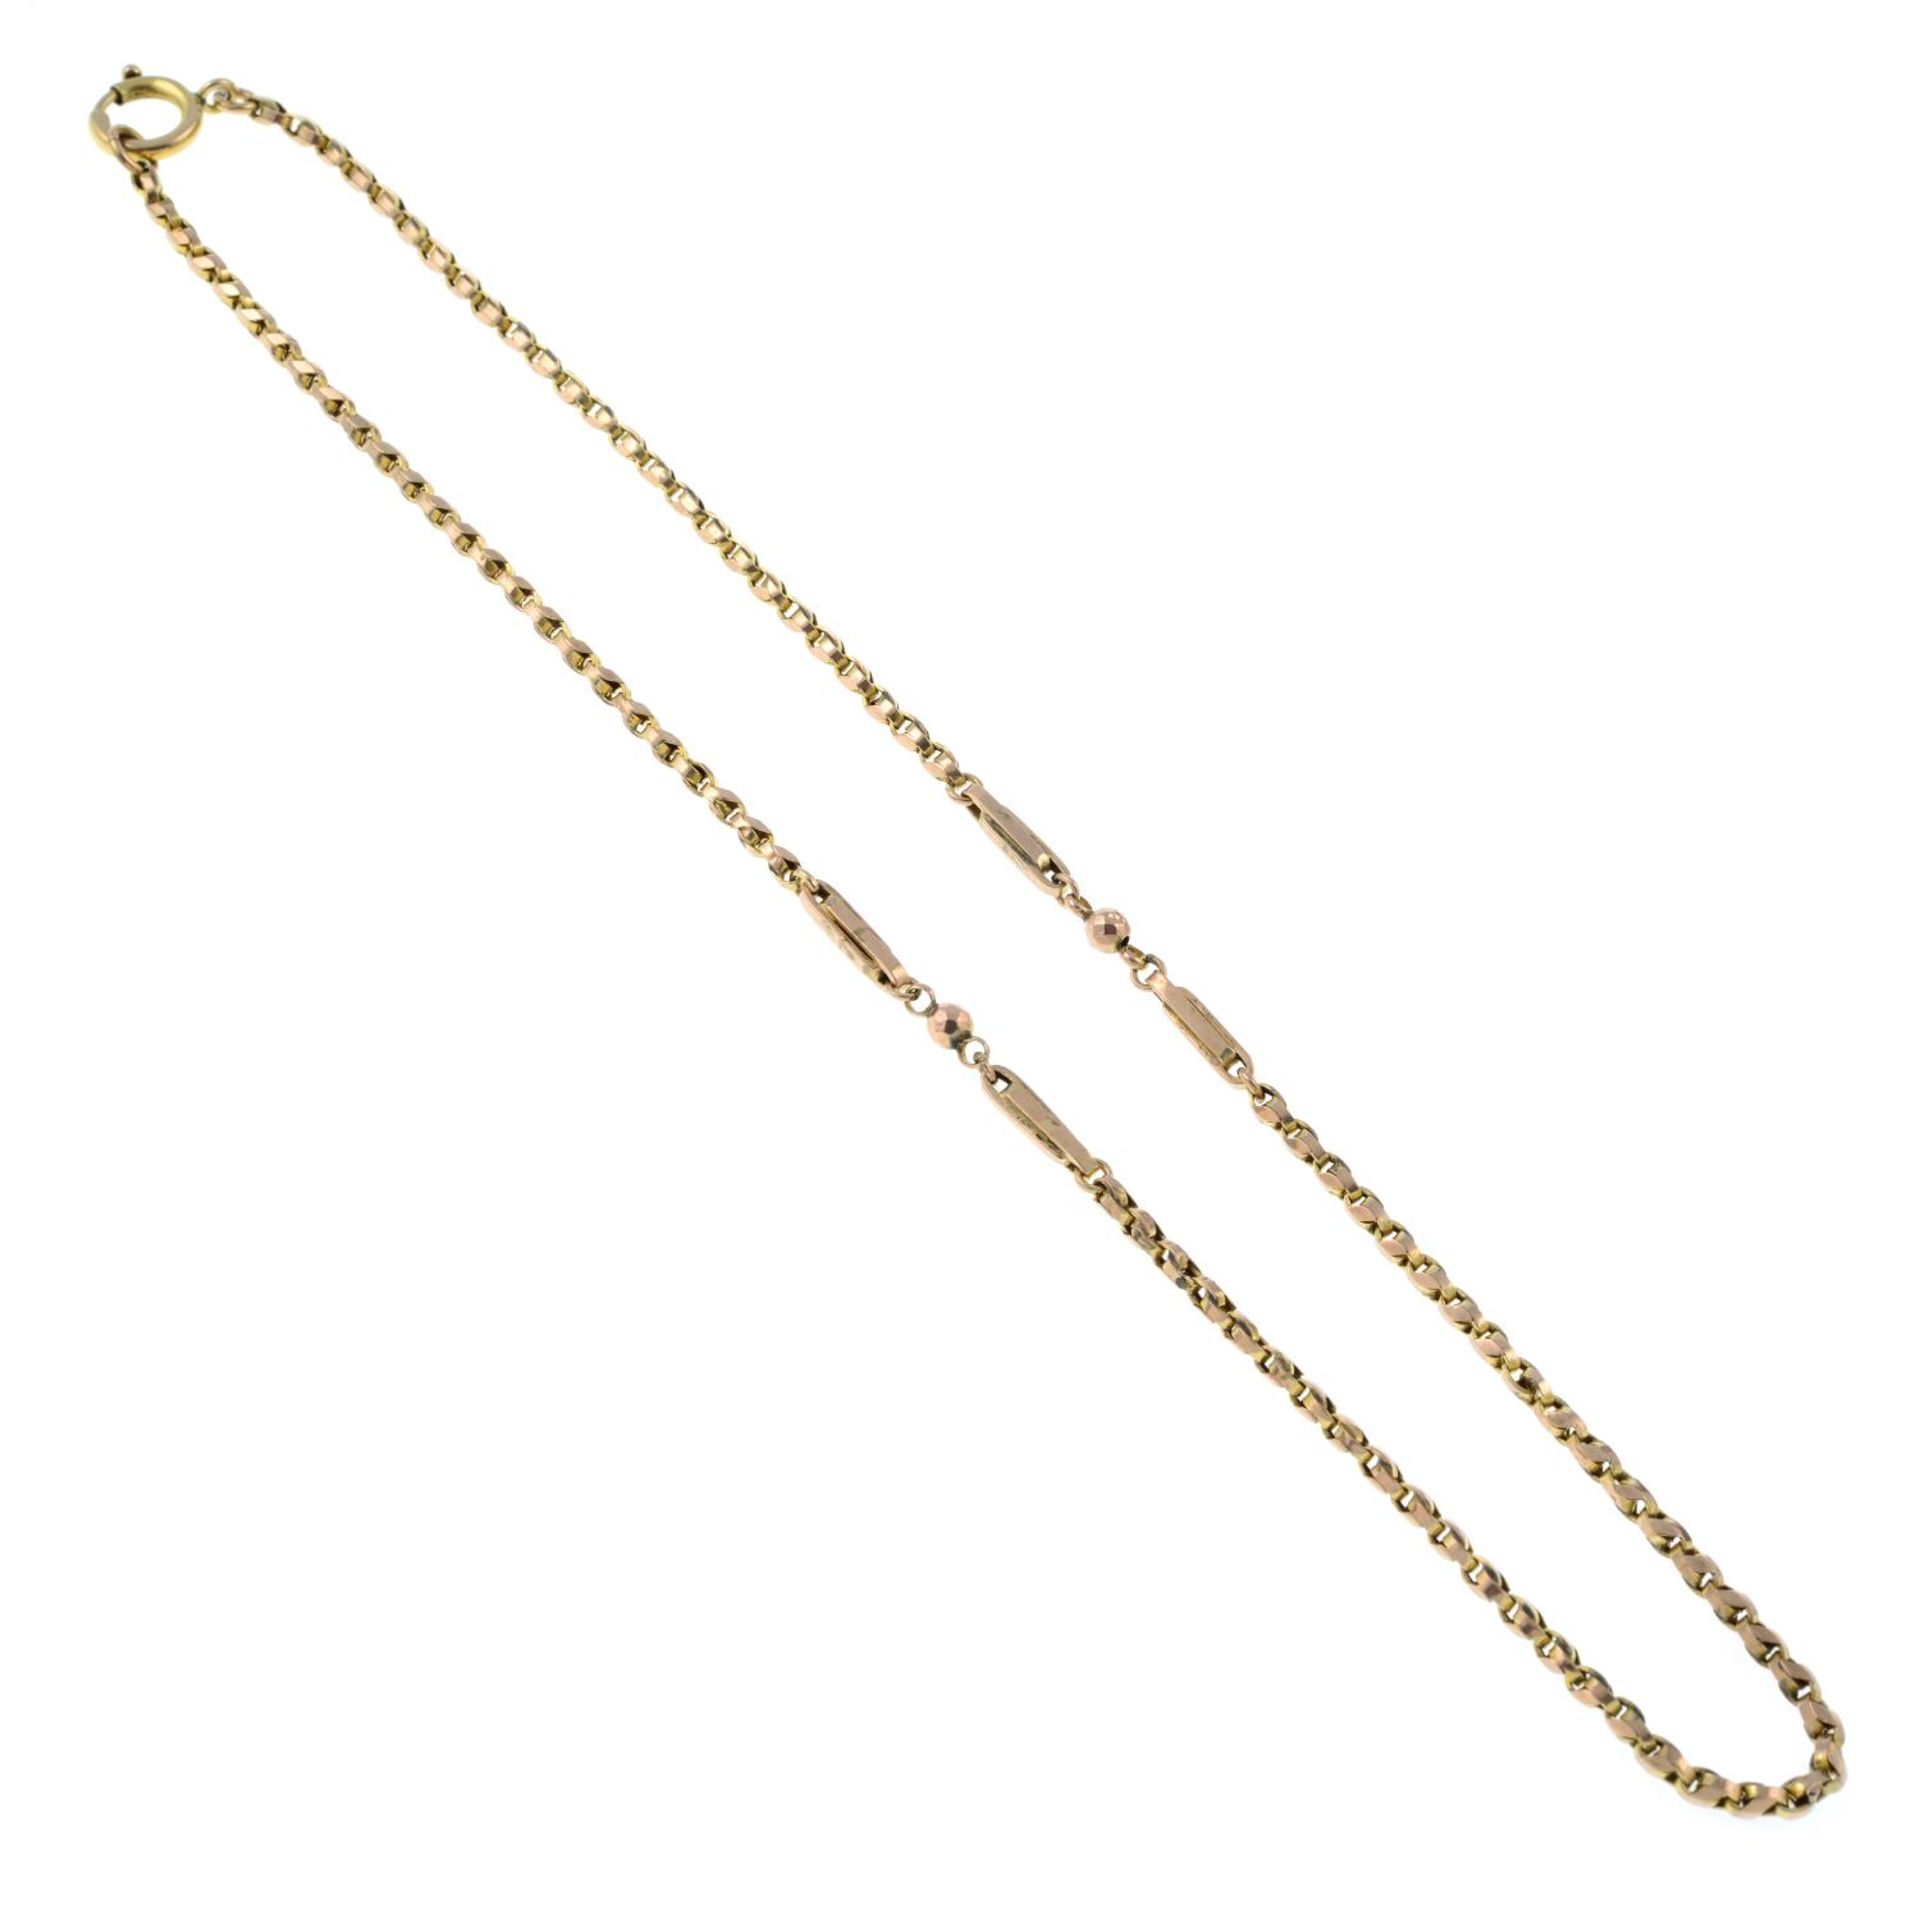 A fancy-link chain.Length 46.5cms. - Image 2 of 2